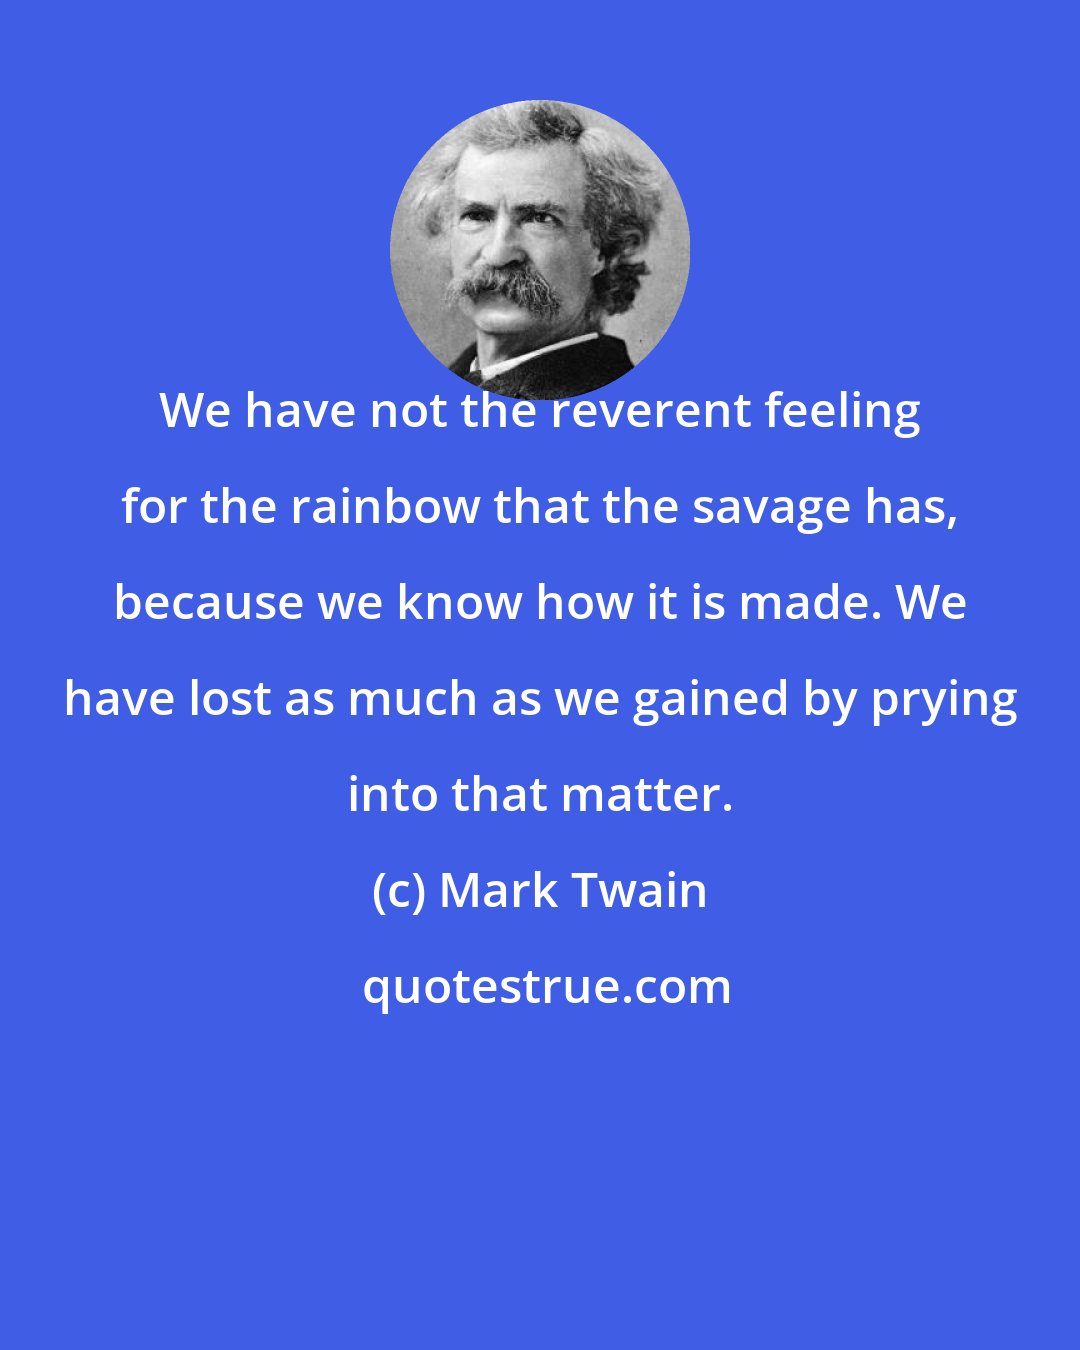 Mark Twain: We have not the reverent feeling for the rainbow that the savage has, because we know how it is made. We have lost as much as we gained by prying into that matter.